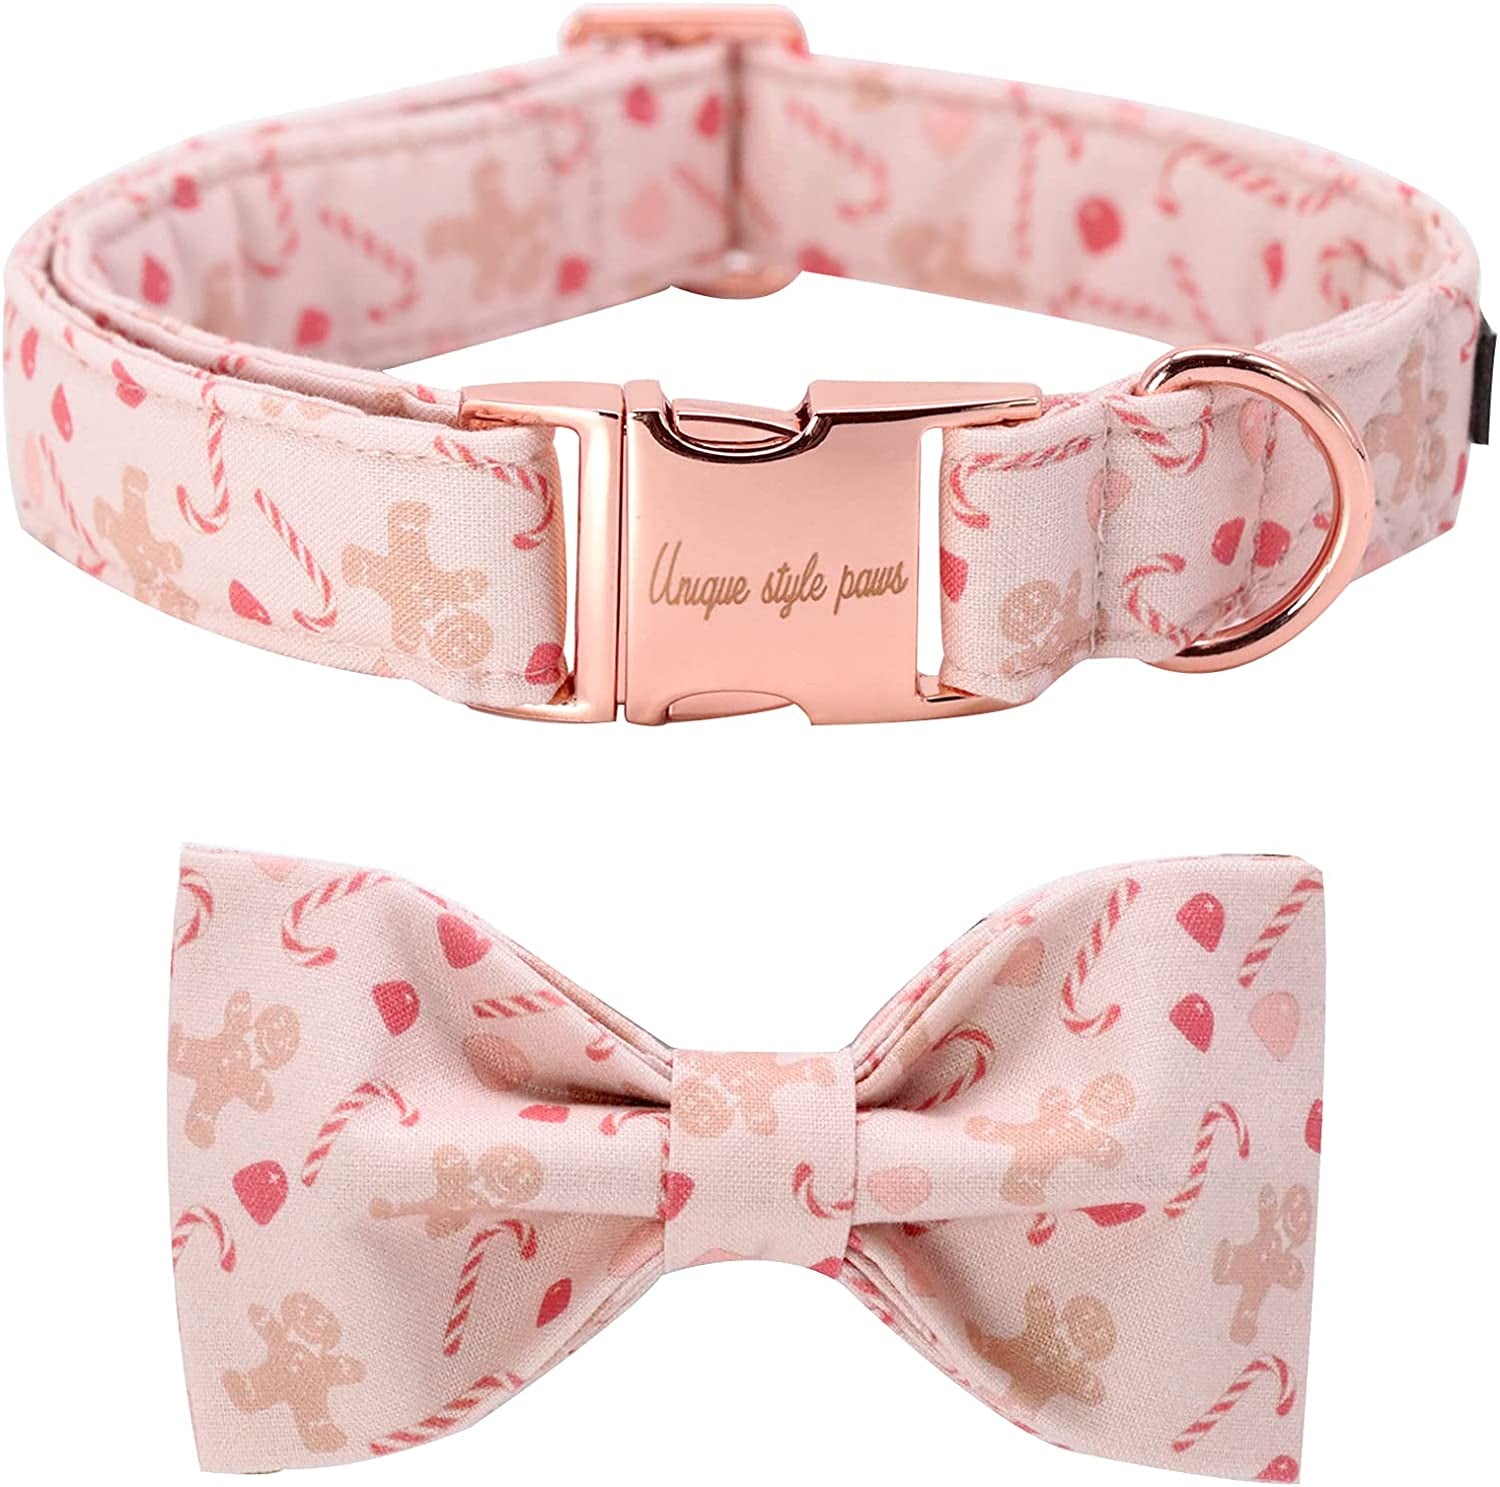 Unique Style Paws Dog Collar, Pet Collar Dog Bowtie Gift for Girl or Boy Dogs, Colorful Adjustable Dog Collar for Medium Dogs Animals & Pet Supplies > Pet Supplies > Dog Supplies > Dog Apparel Unique style paws Gingerbread Man XX-Small 